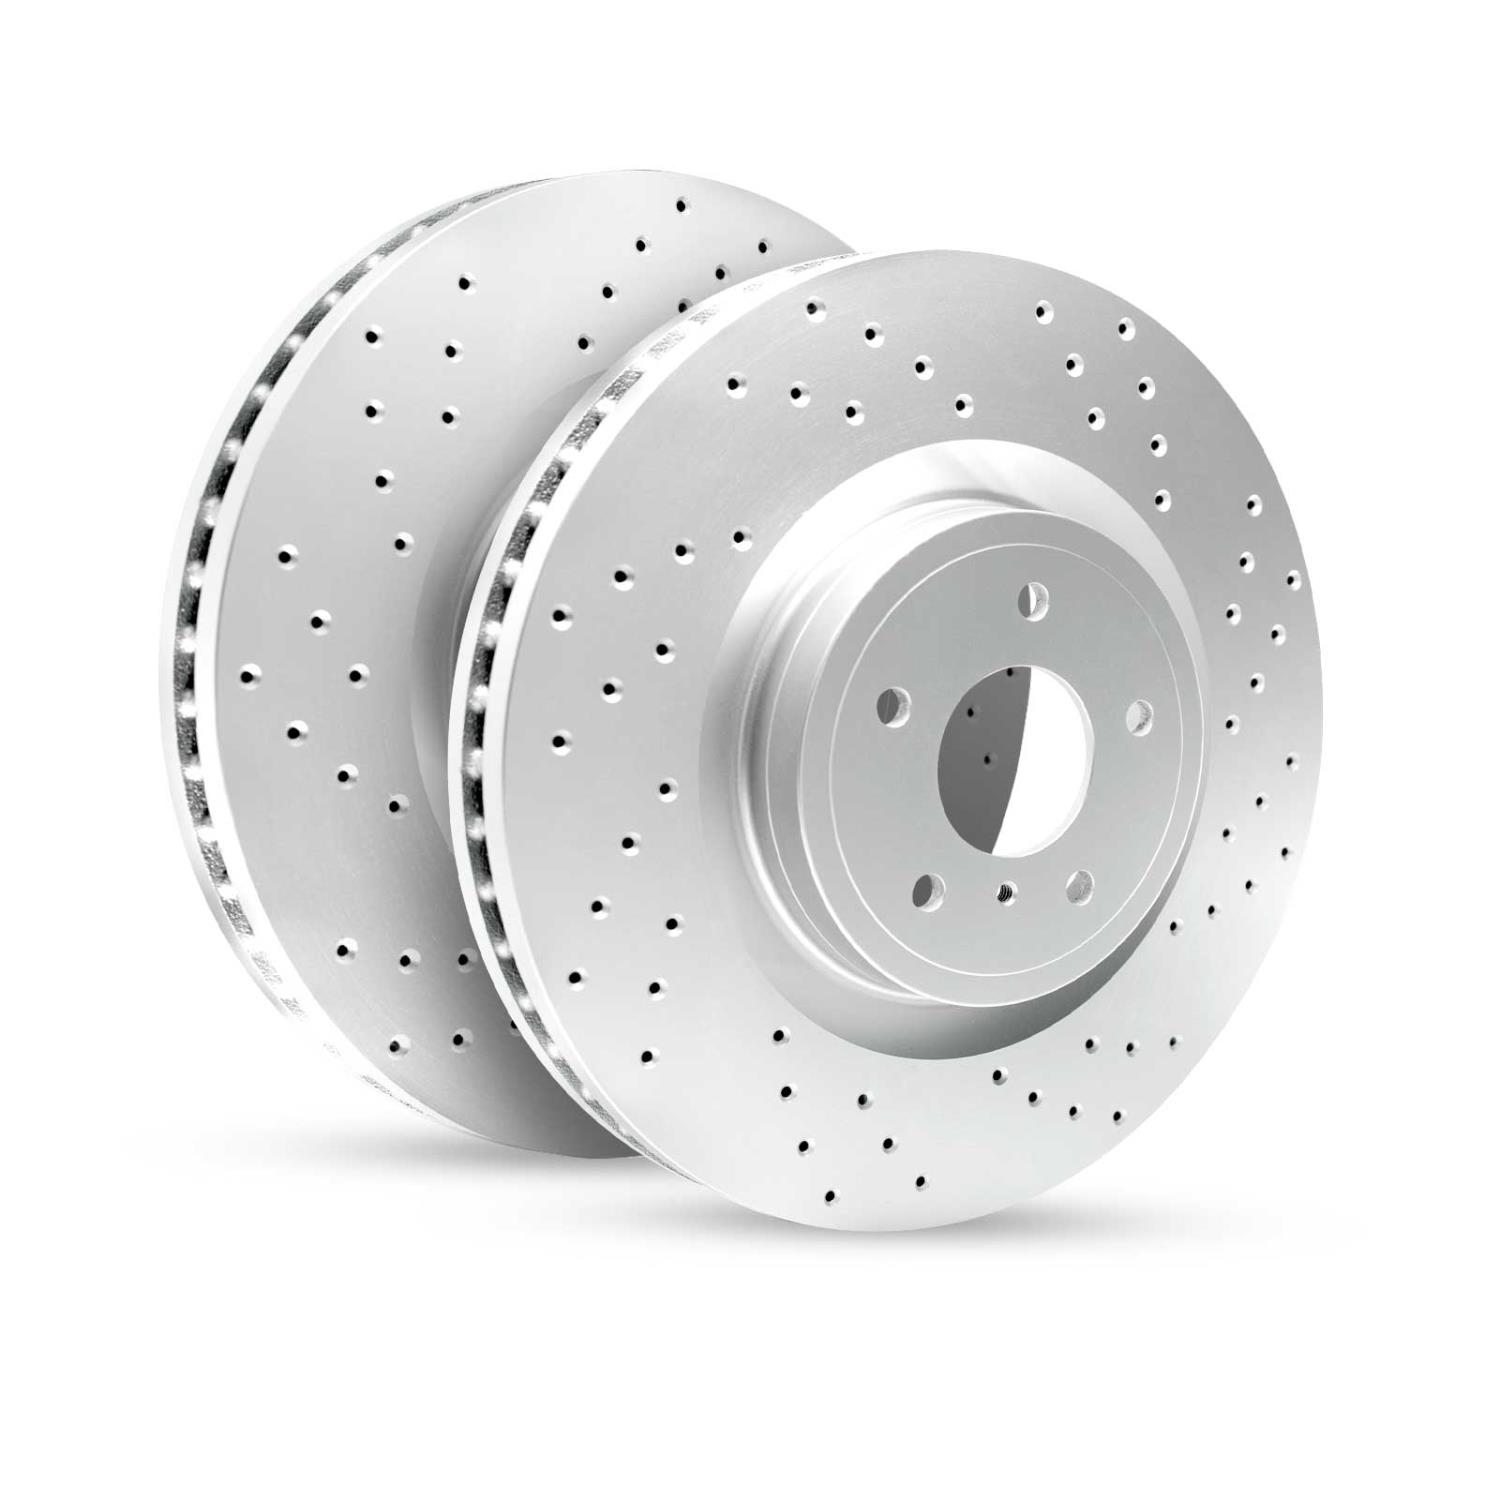 GEO-Carbon Drilled/Slotted Rotors, 2006-2010 BMW, Position: Rear